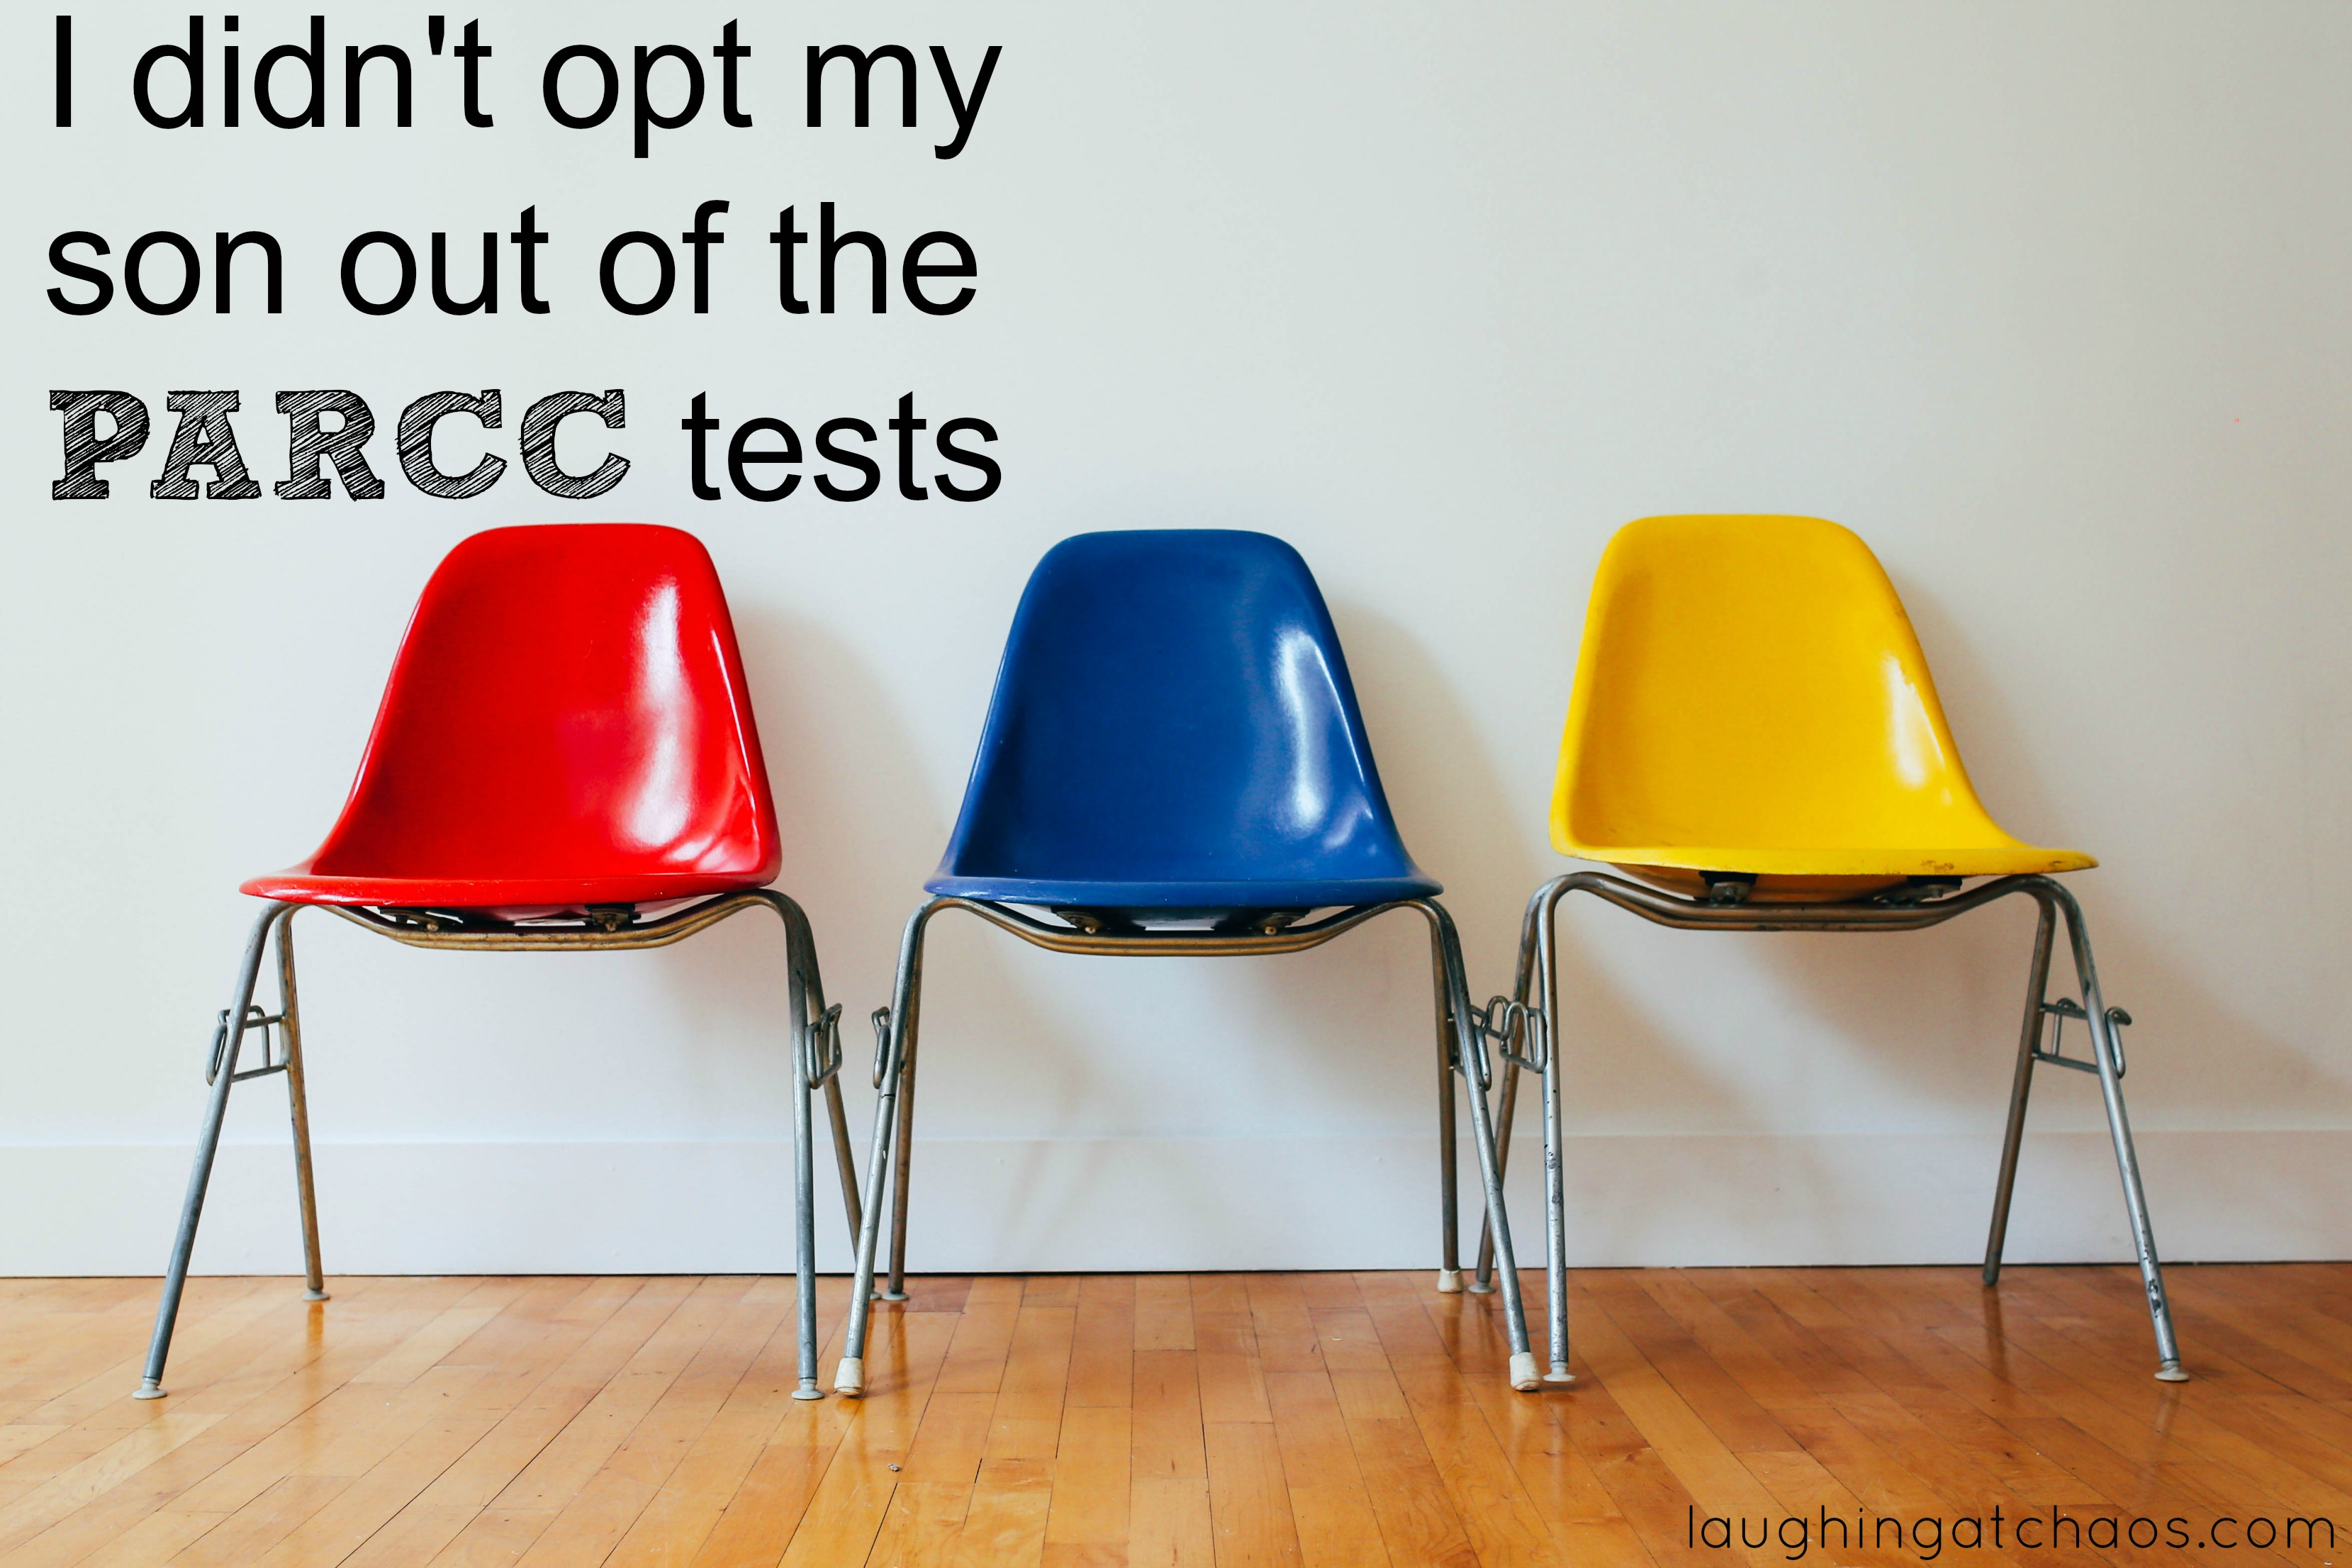 I didn’t opt my son out of the PARCC tests